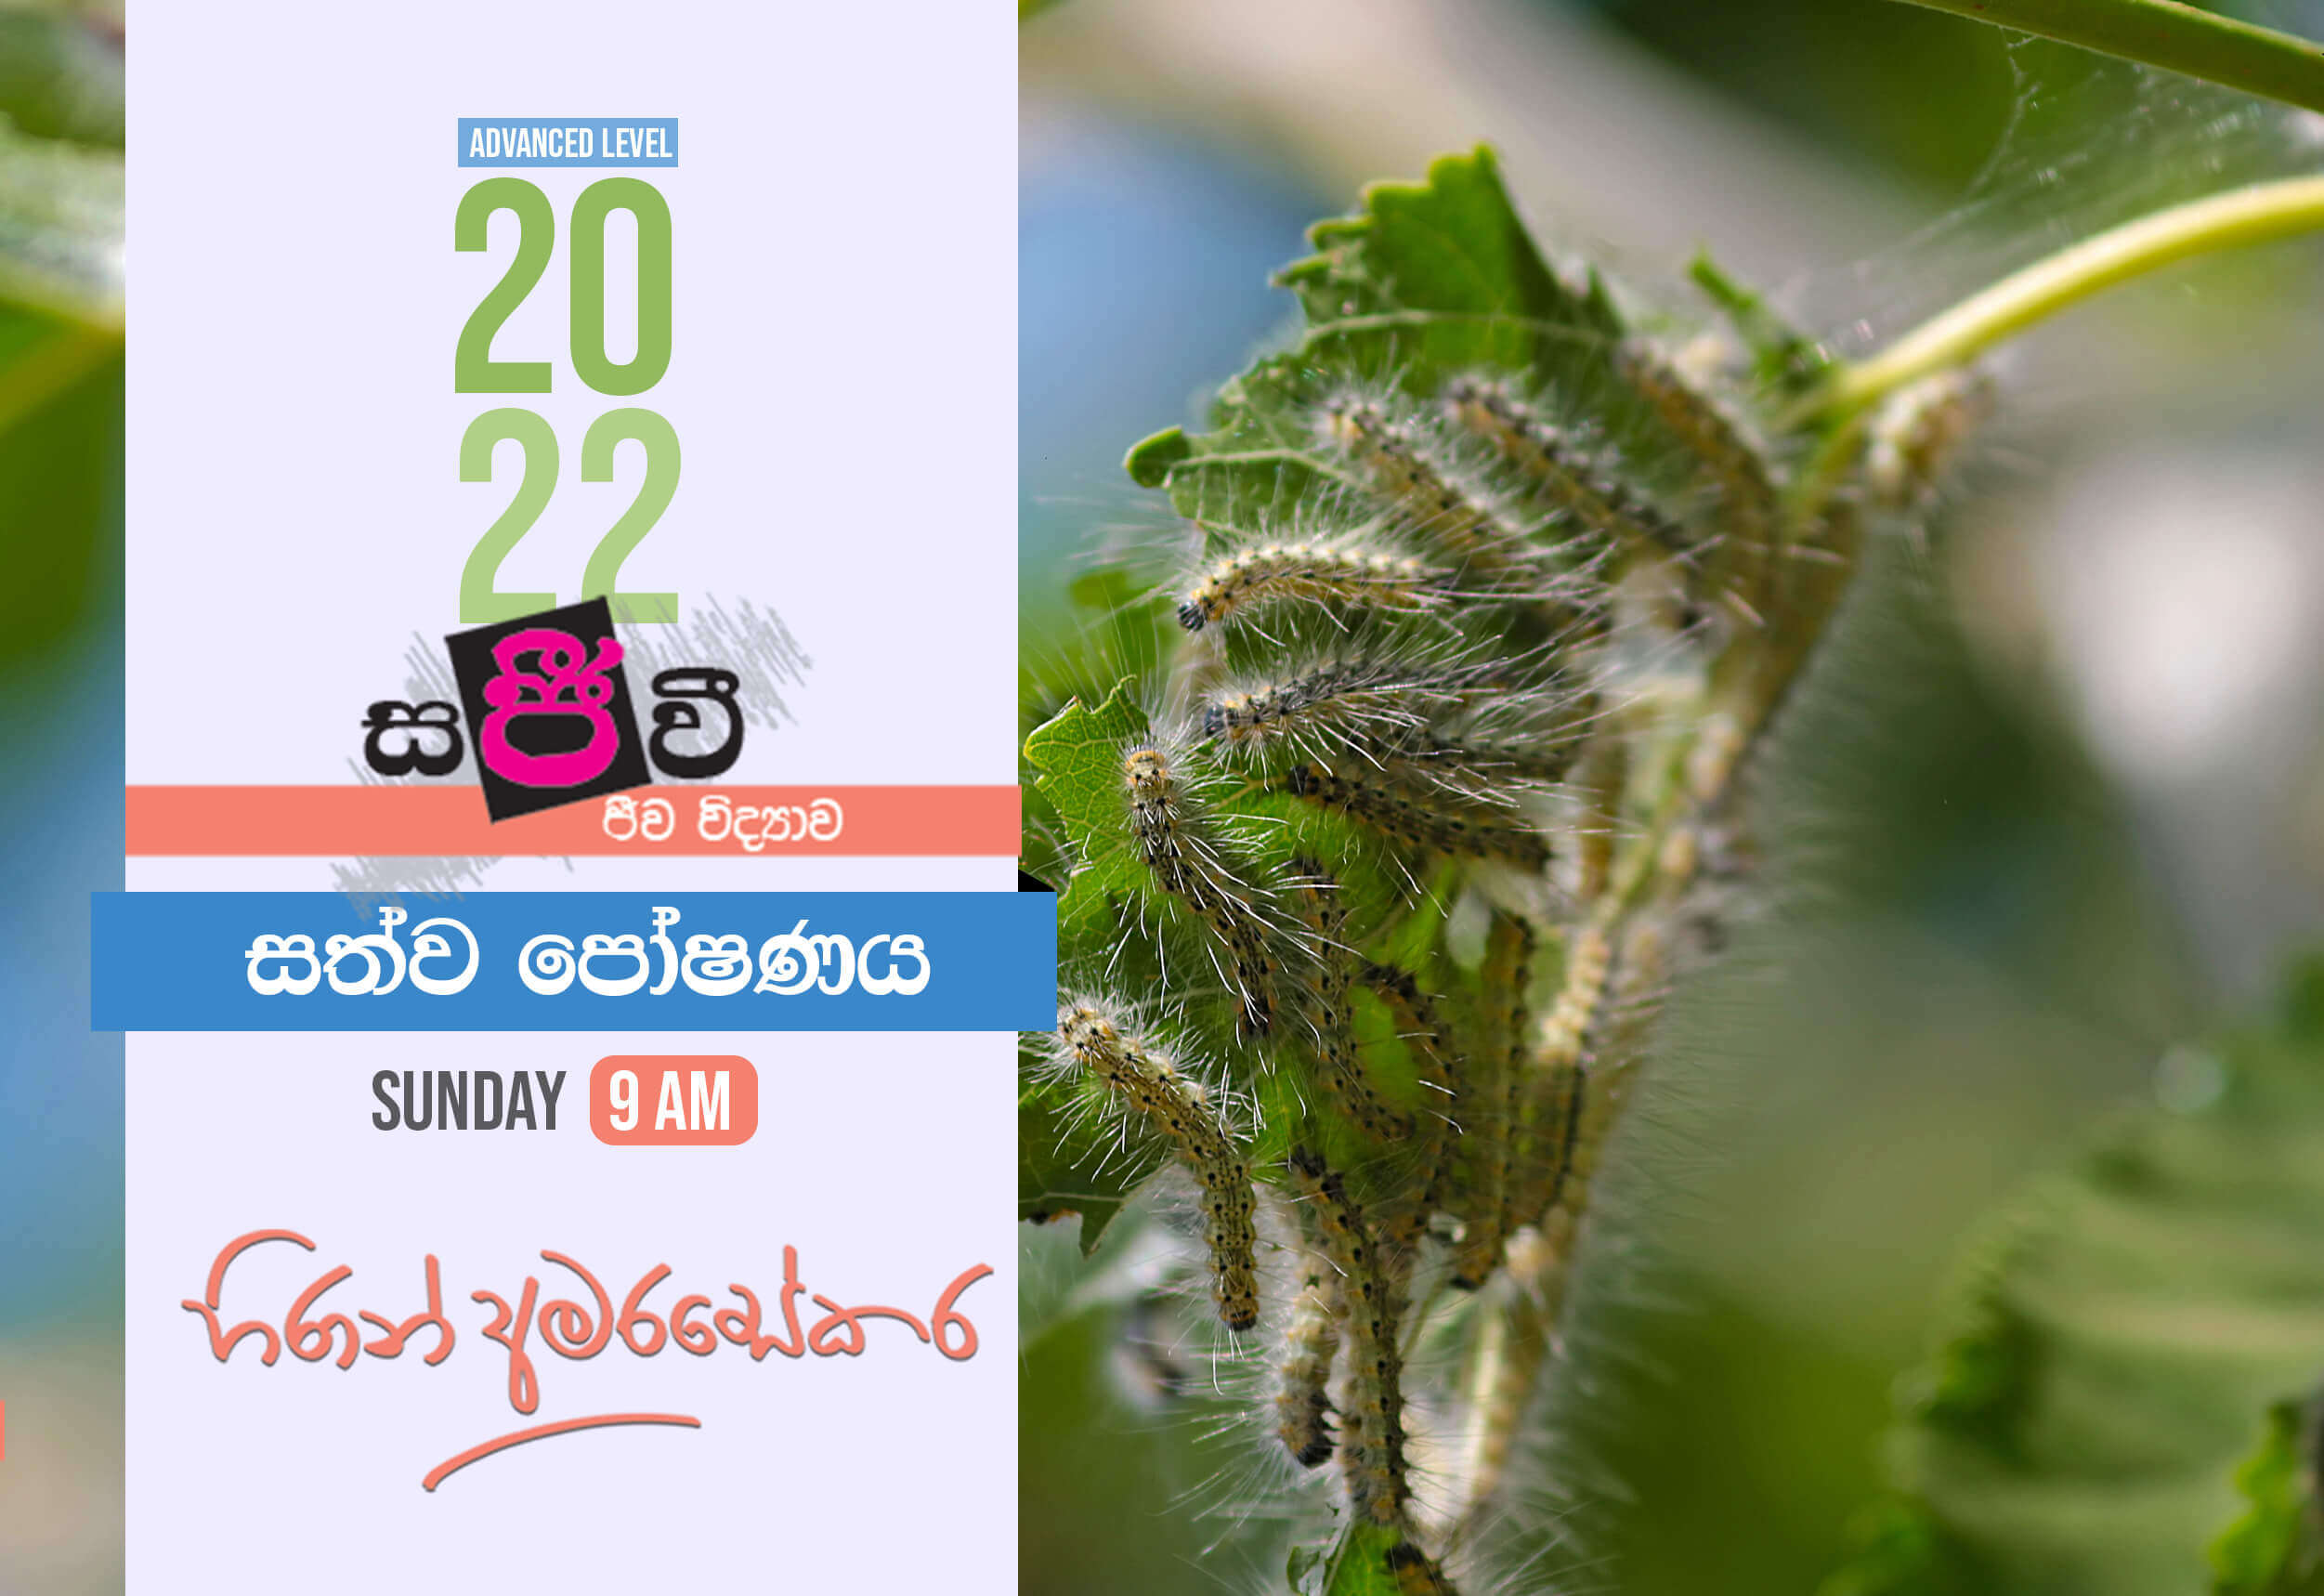 biology essay questions and answers in sinhala pdf in english